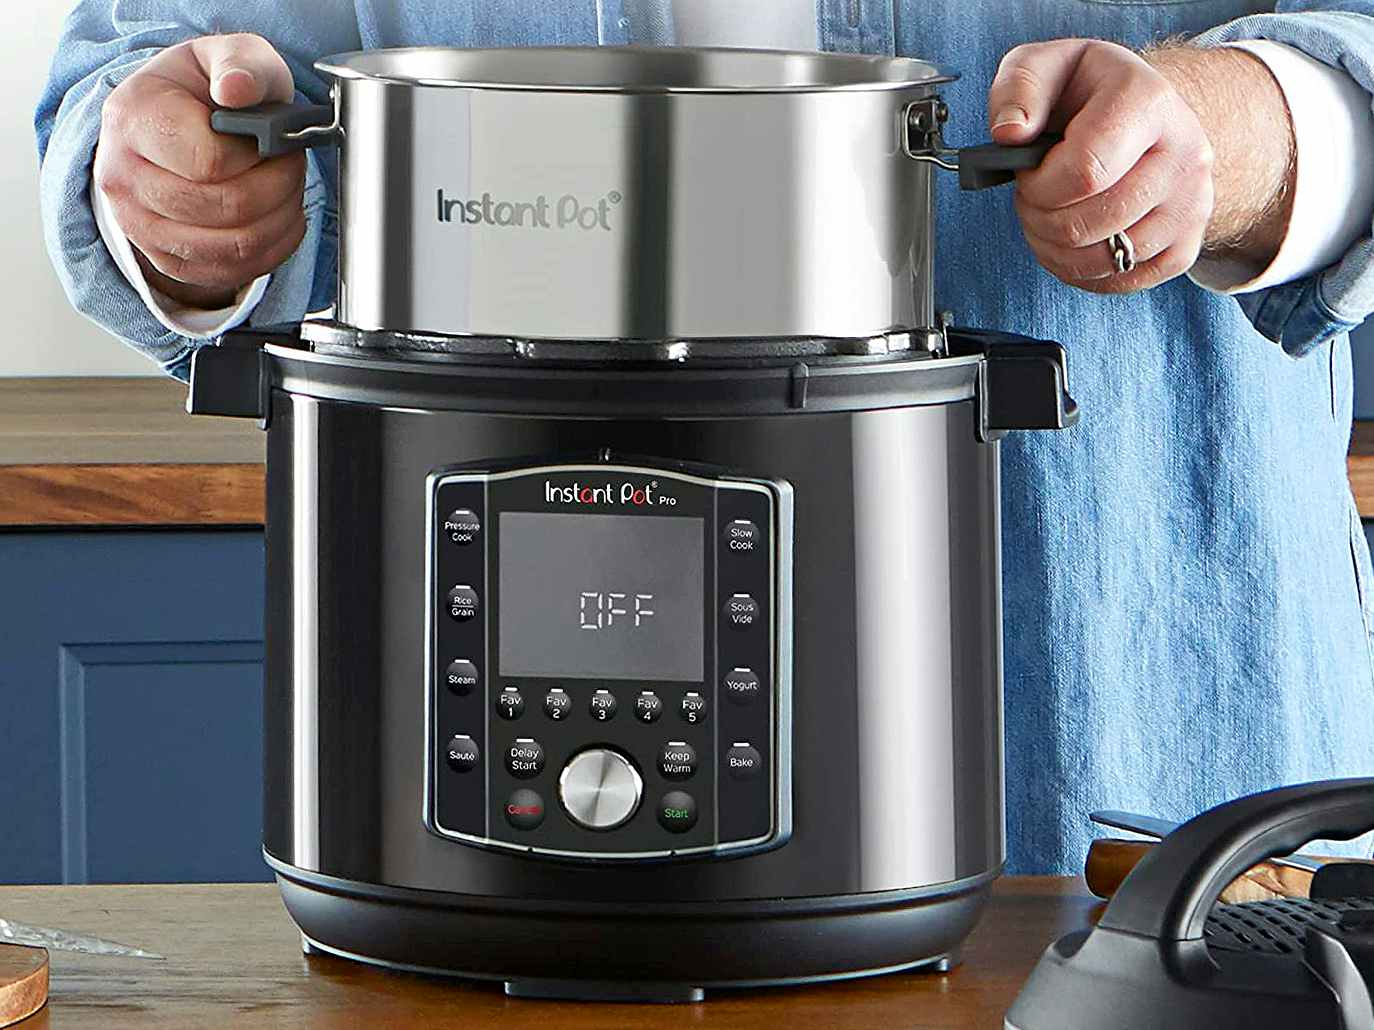 What is the purpose of the sealing ring on the Instant Pot Duo Plus?